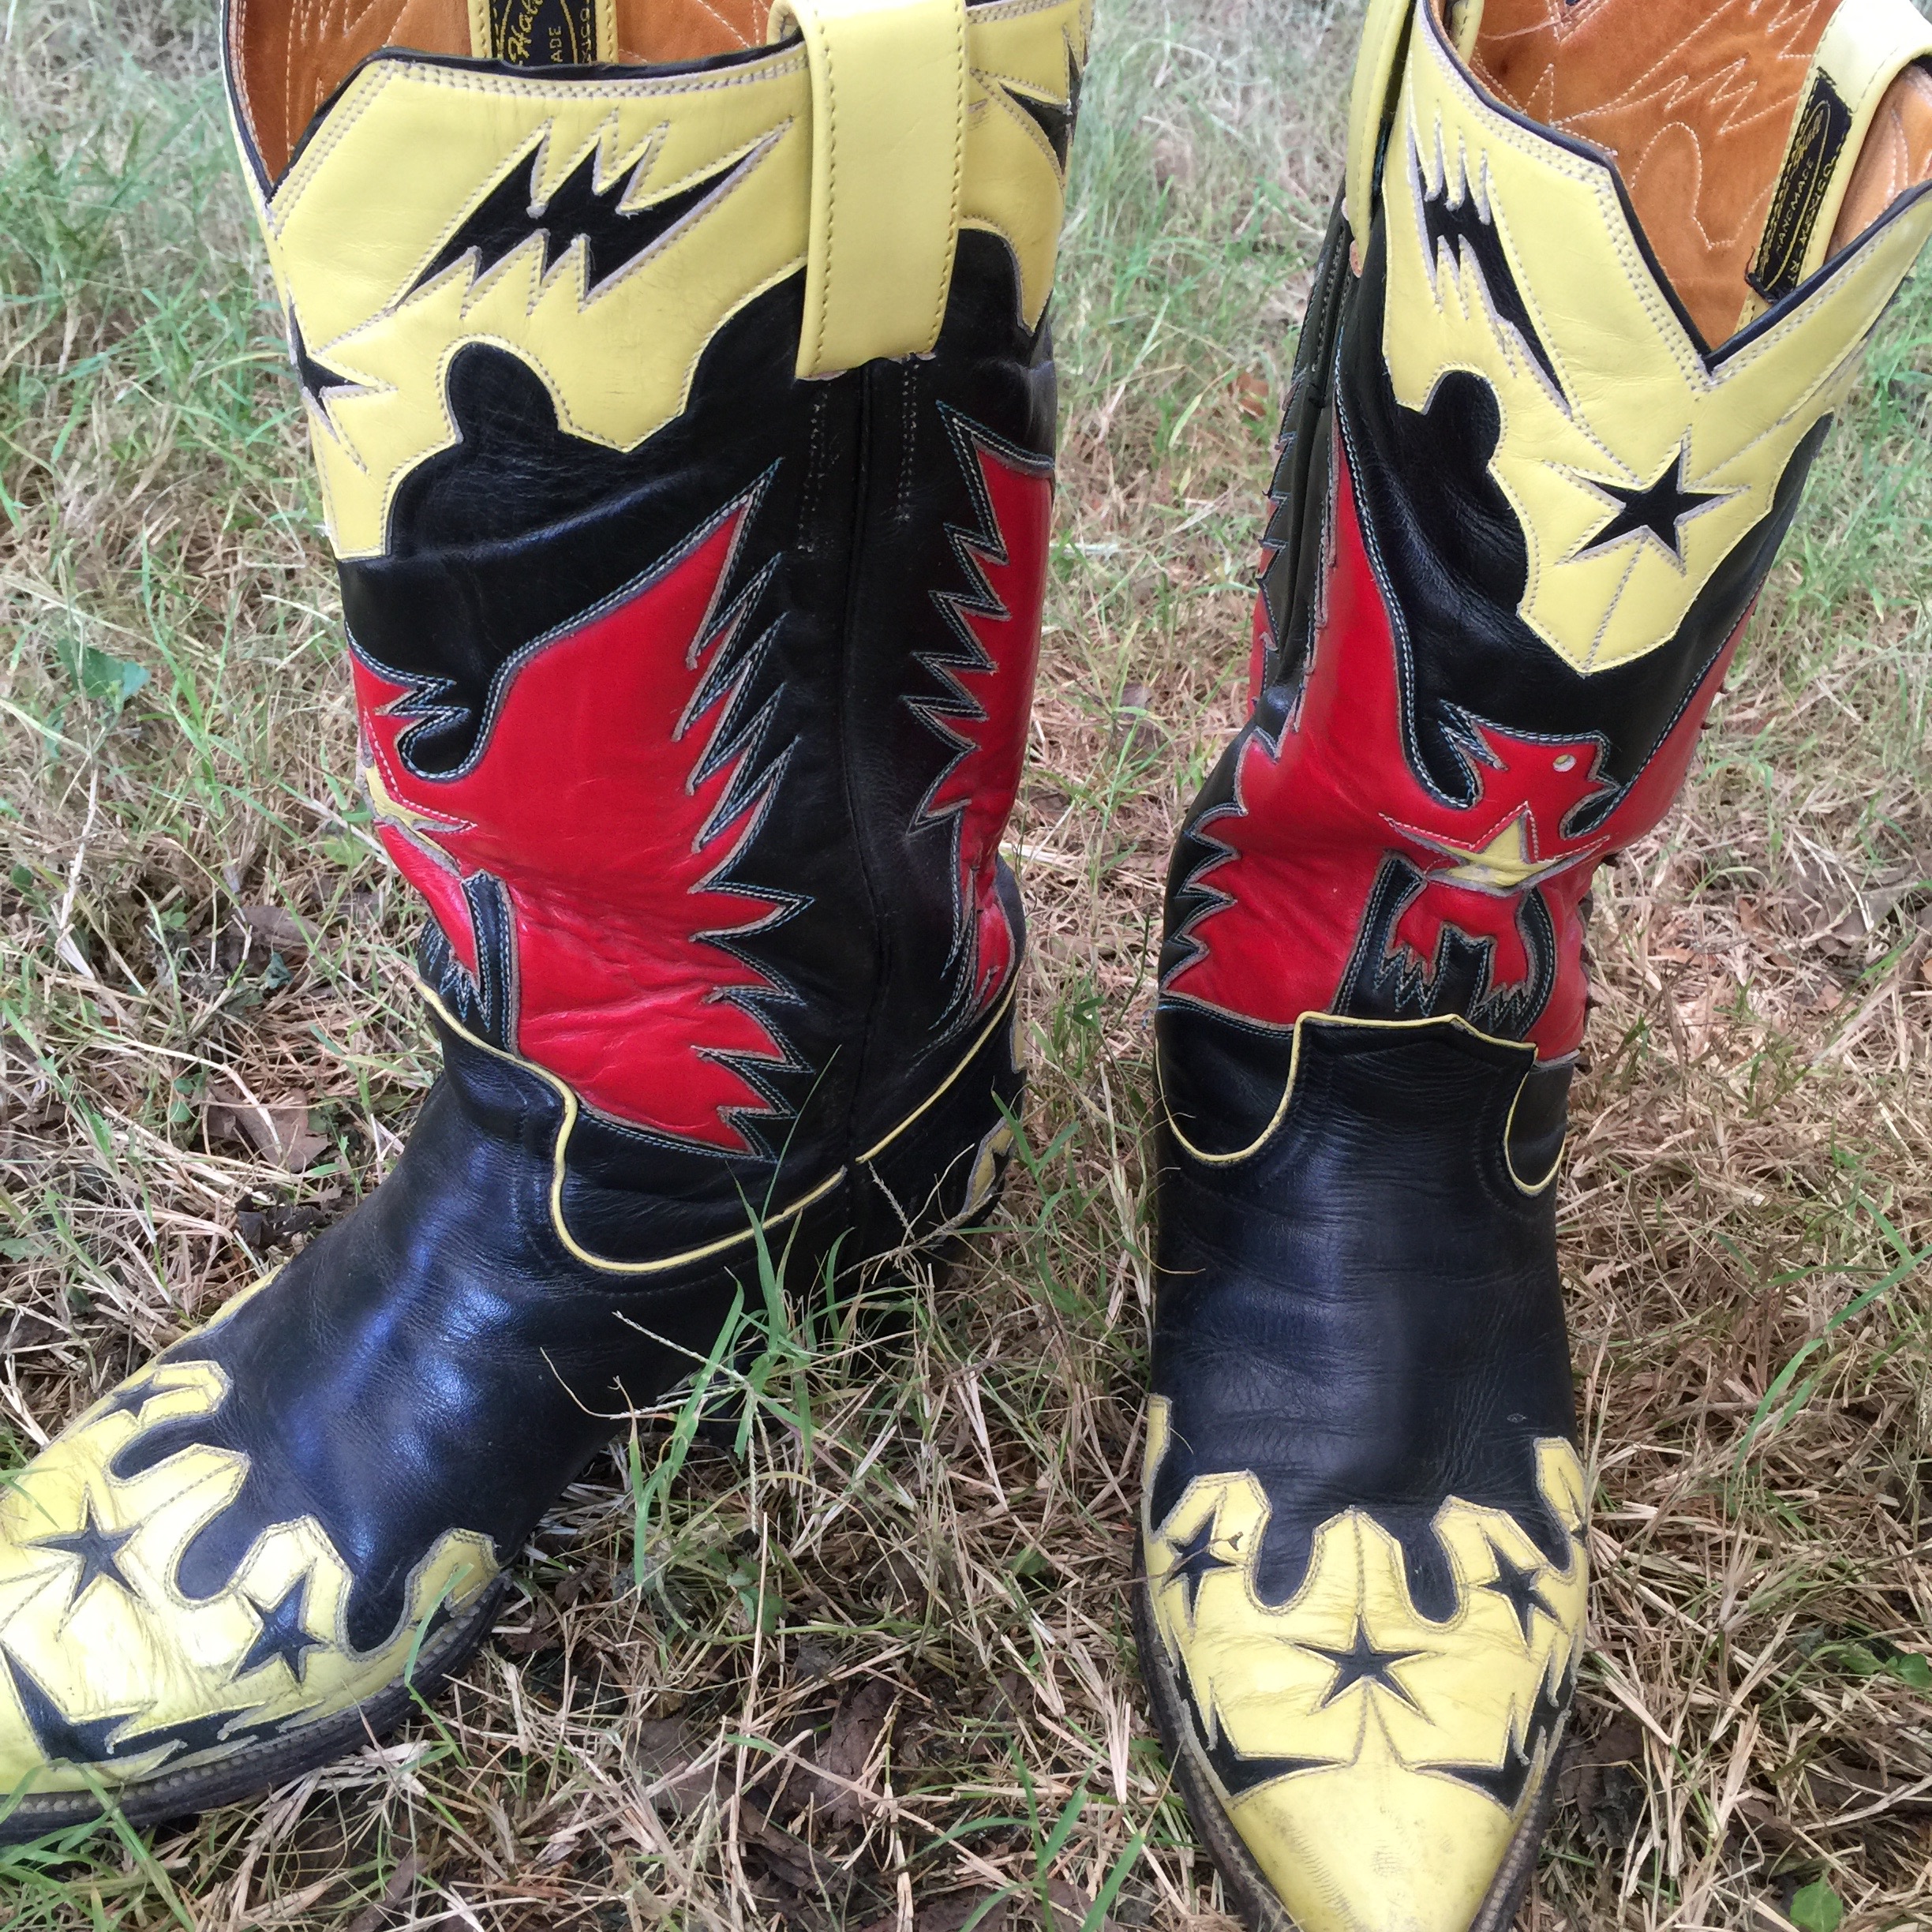 red eagle boots